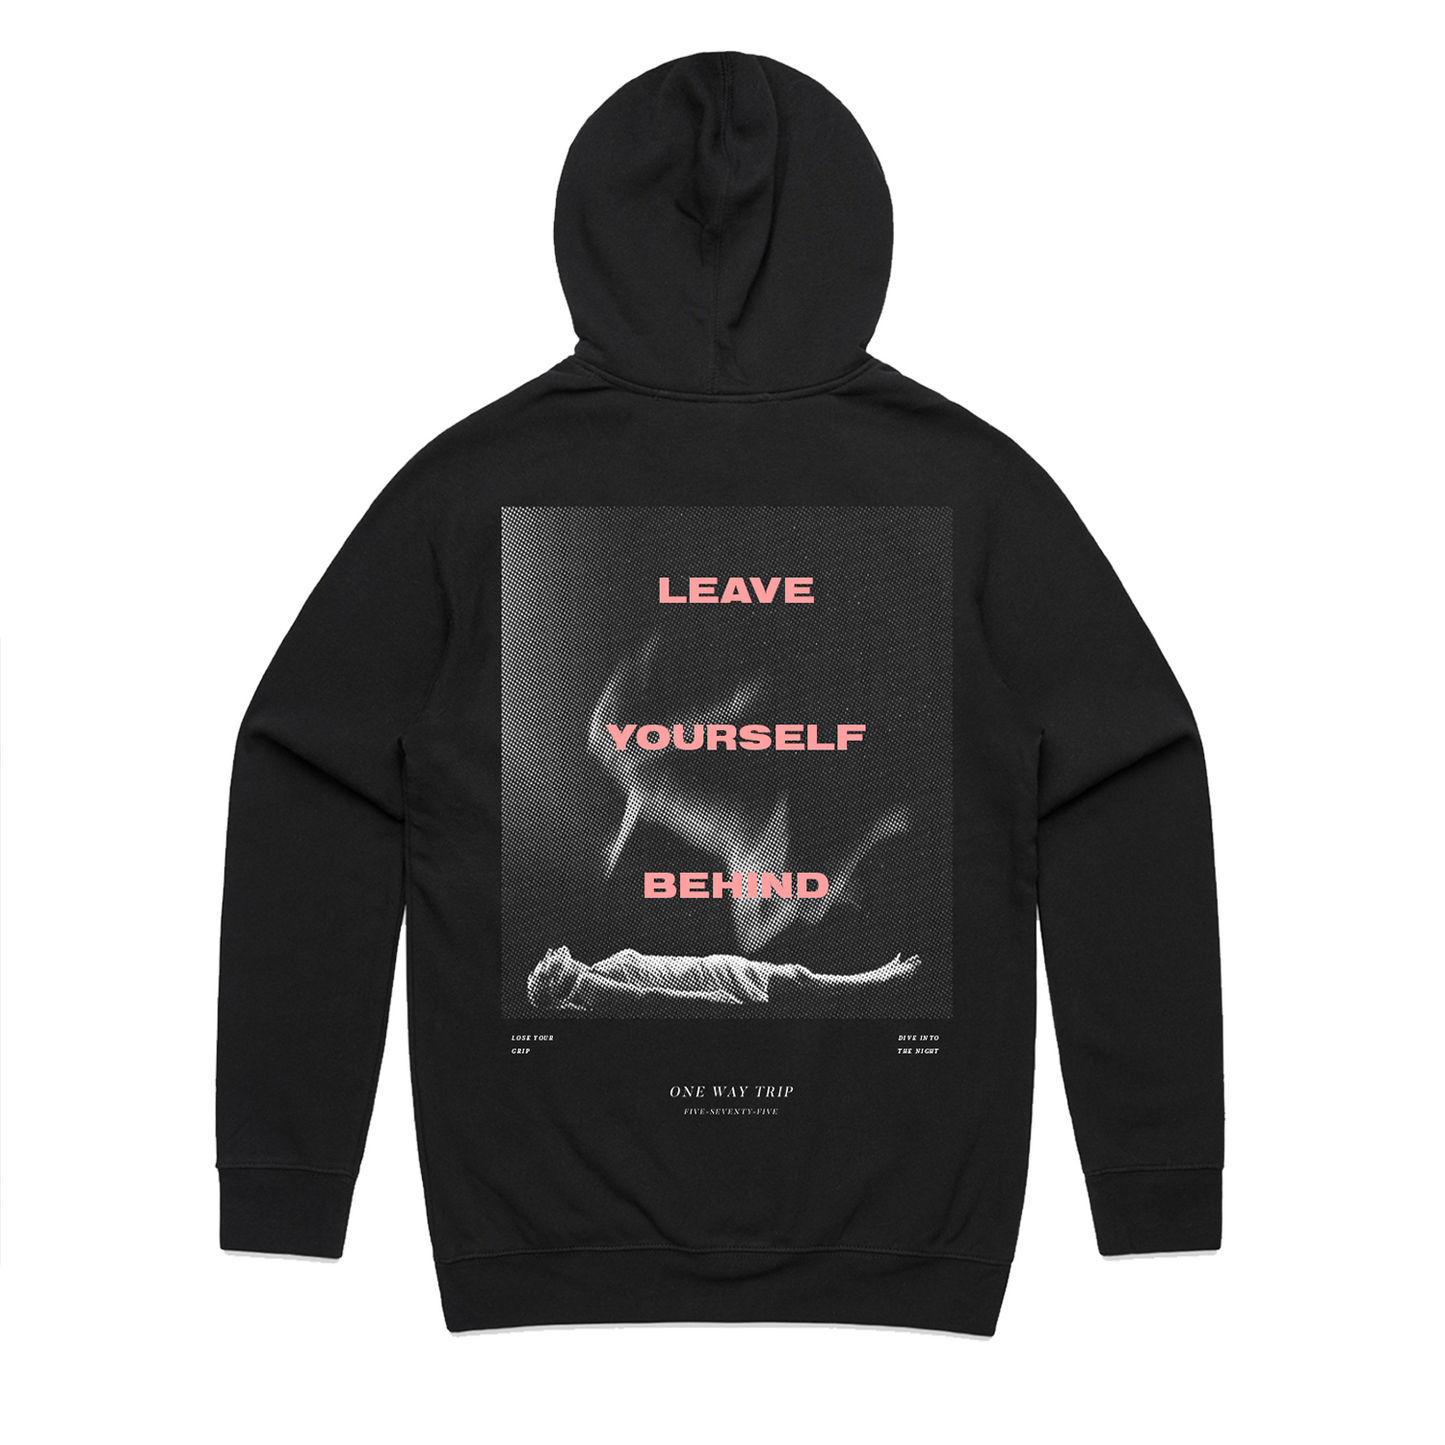 THE 'LEAVE YOURSELF' HOODIE